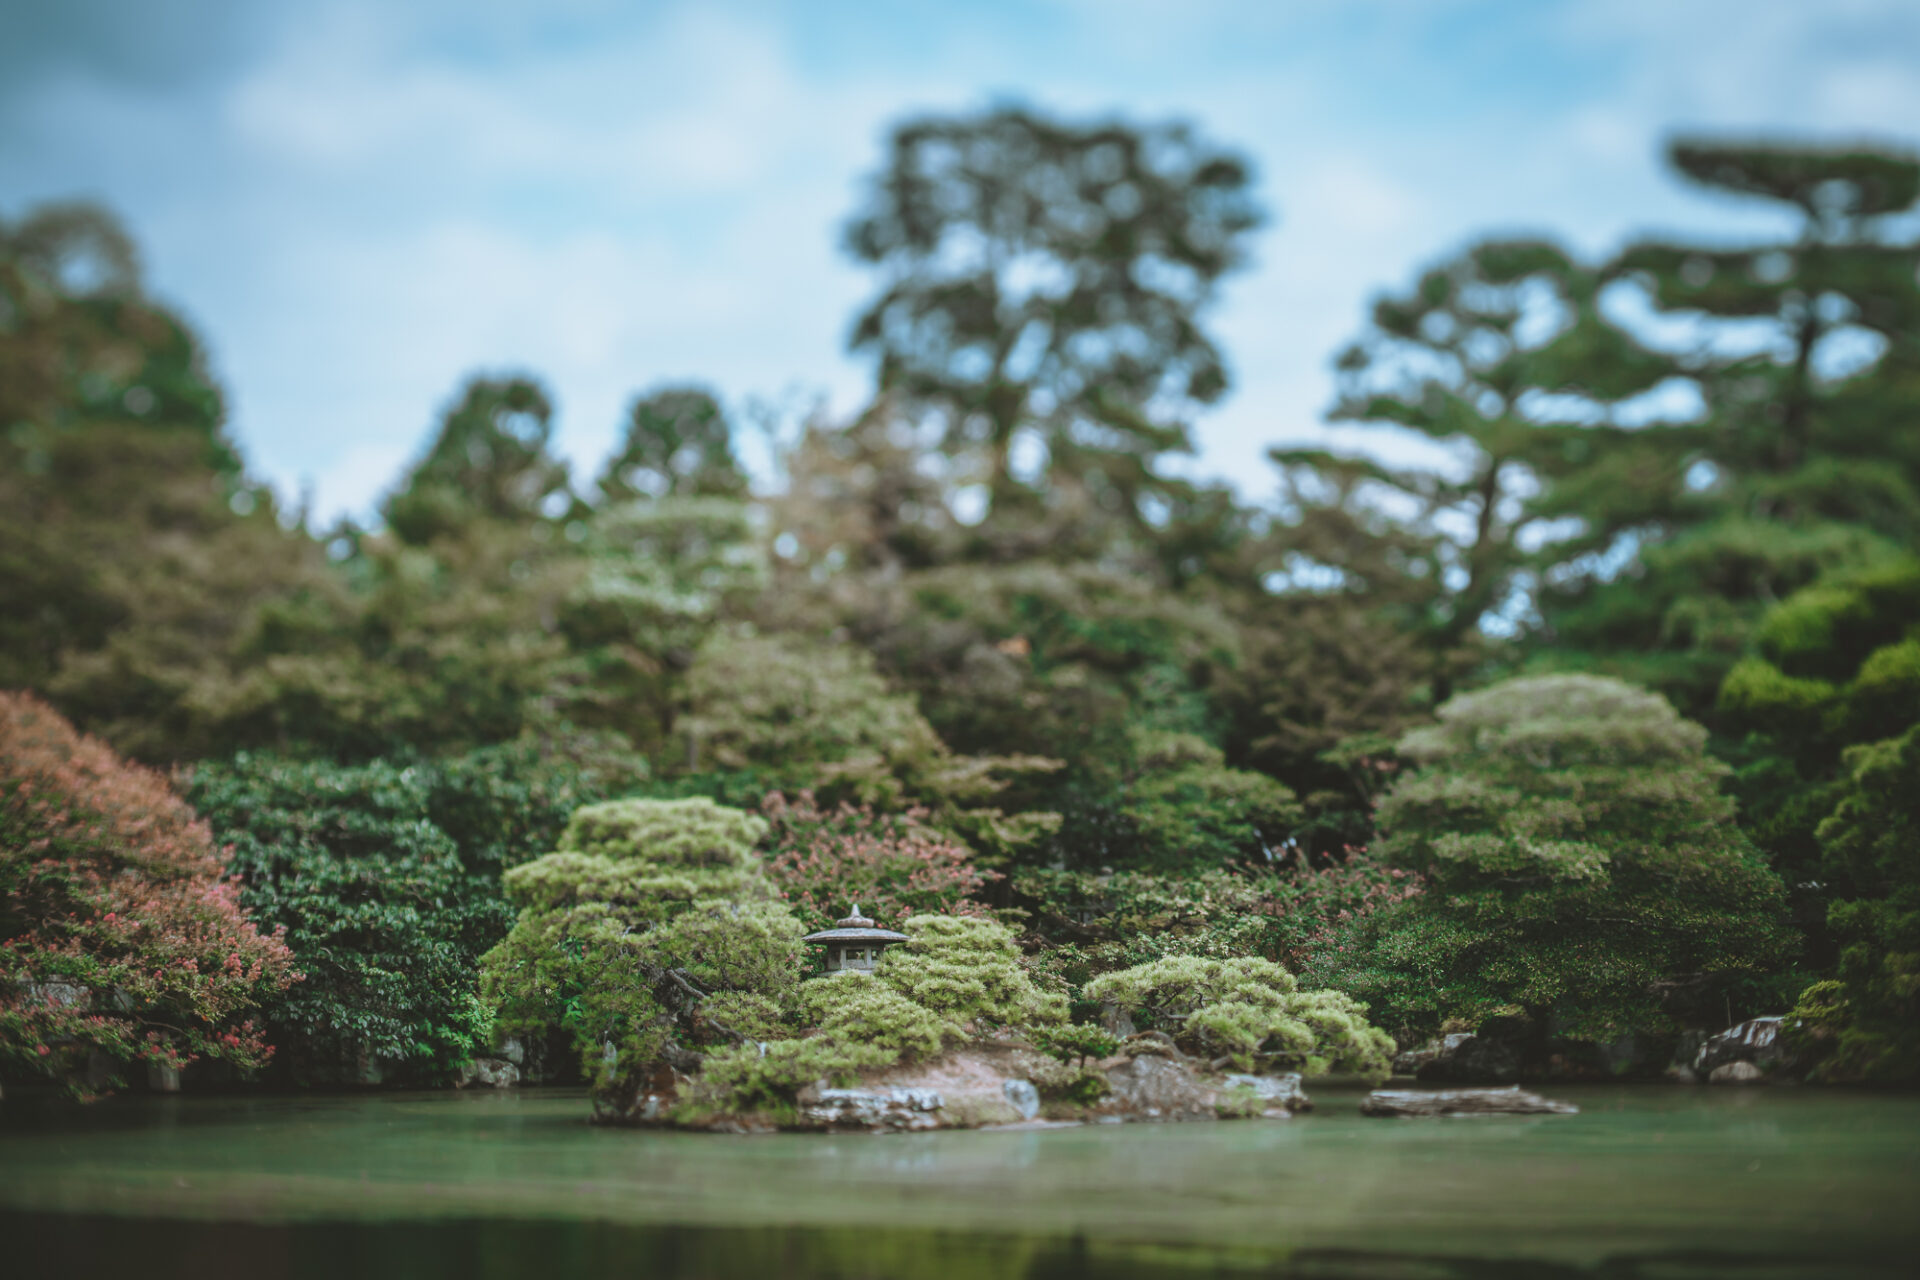 Gardens at Kyoto Imperial Palace